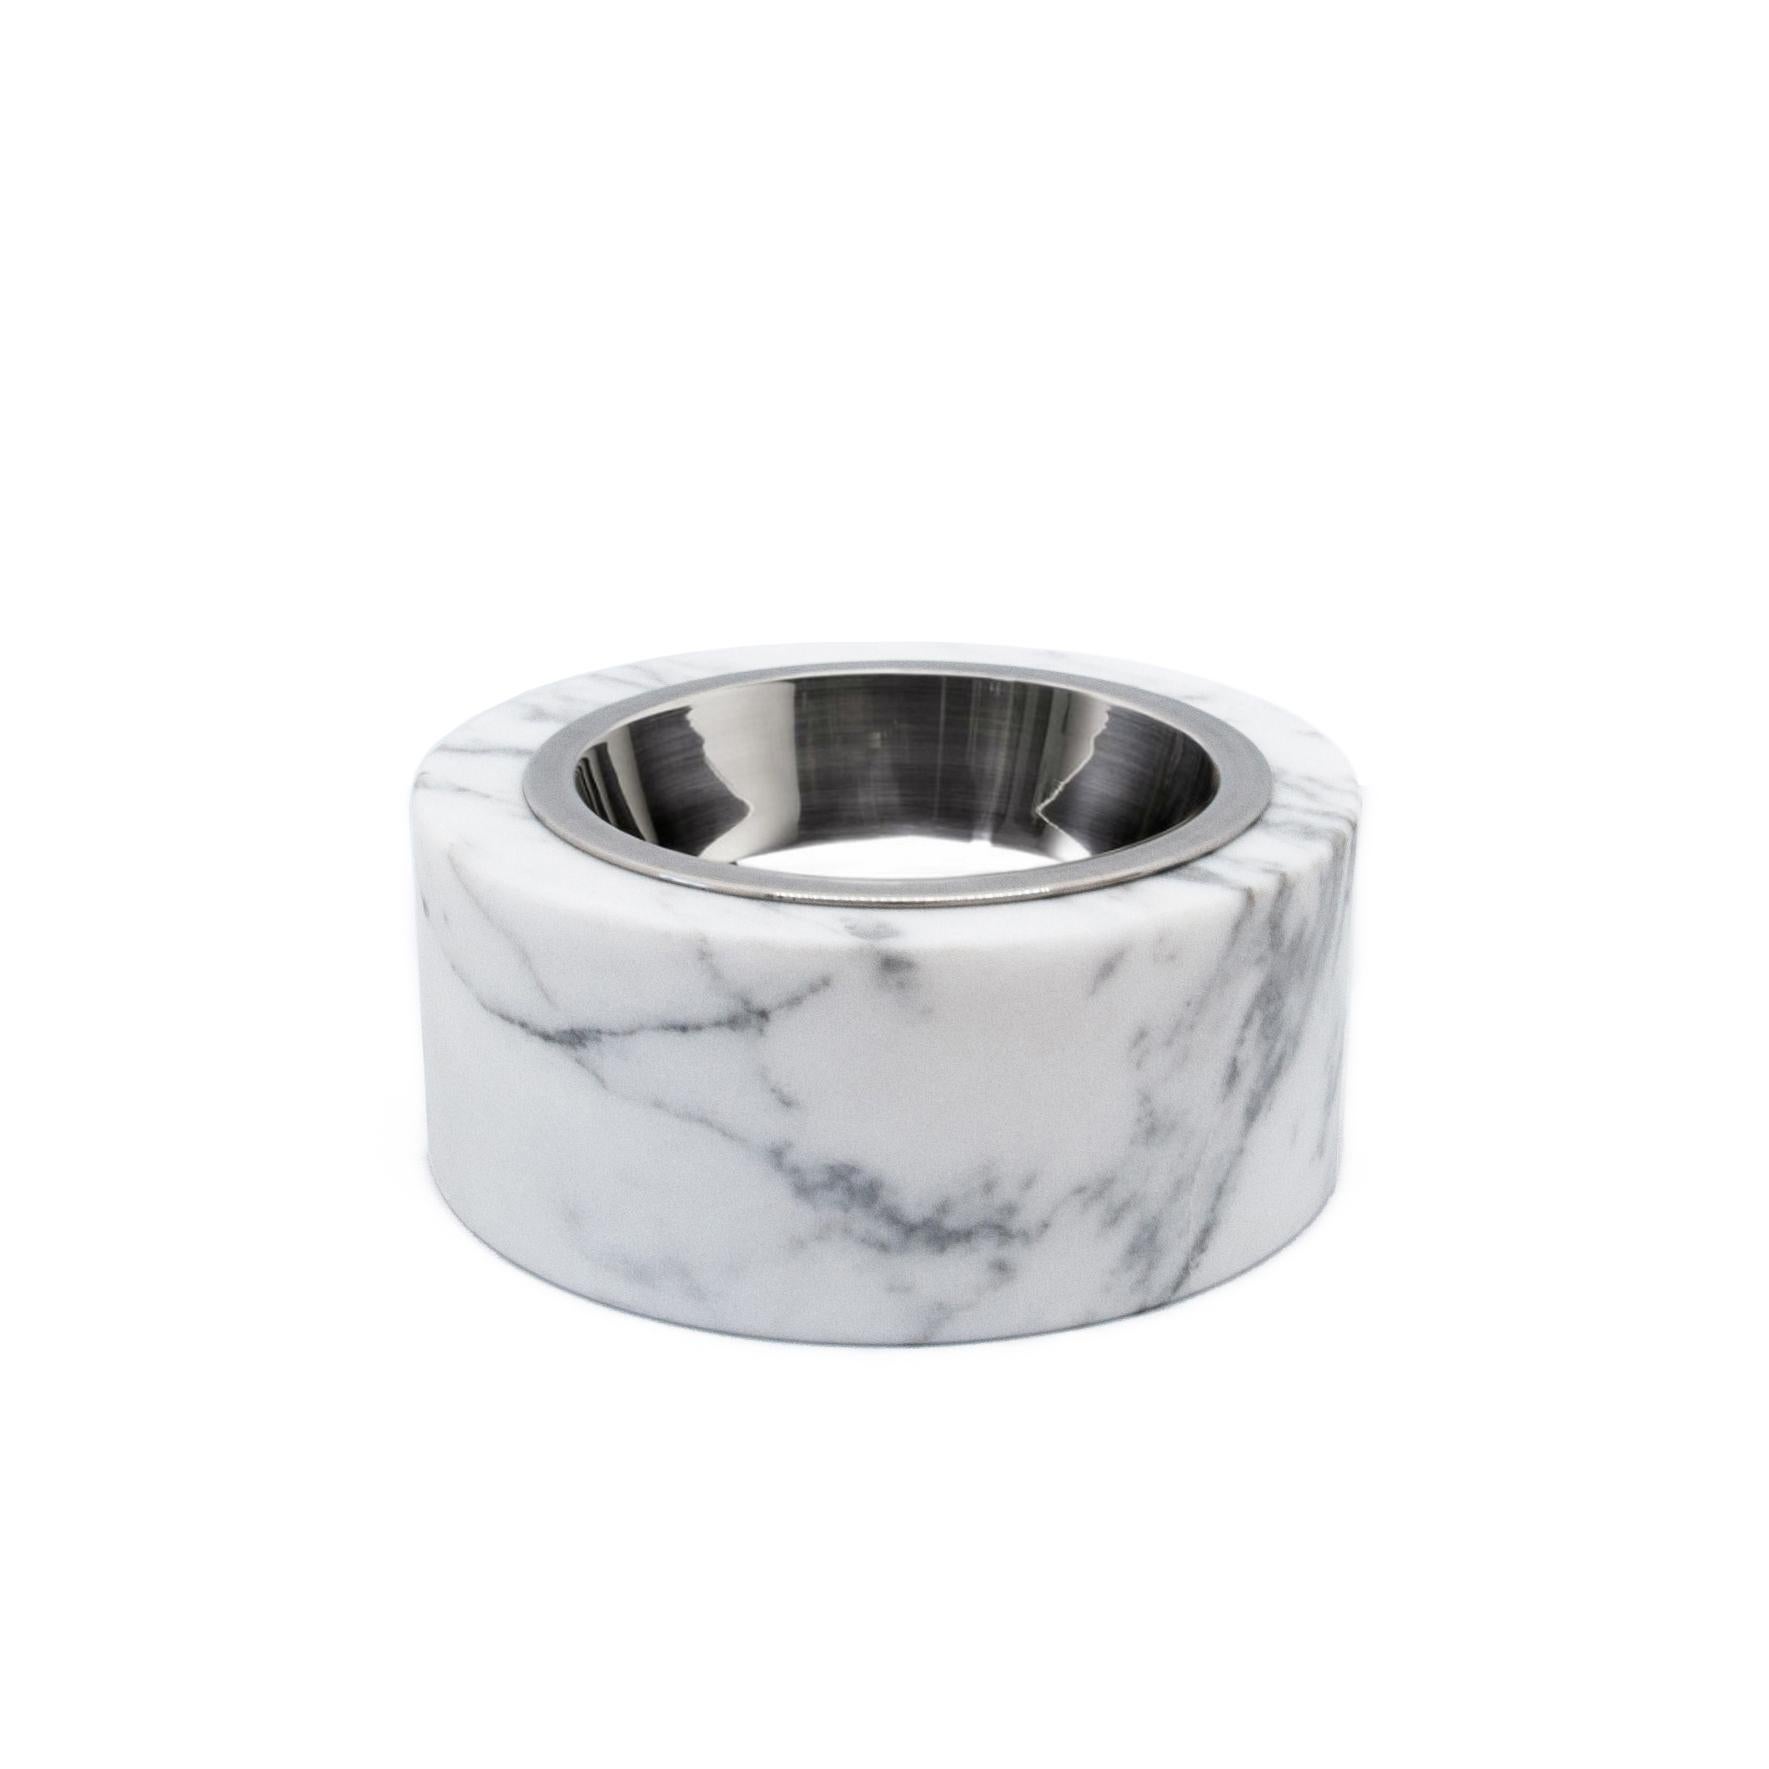 Rounded white Carrara marble bowl for cats and dogs with removable stainless steel bowl, made in Italy, Carrara. Size medium.
Each piece is in a way unique (every marble block is different in veins and shades) and handmade by Italian artisans